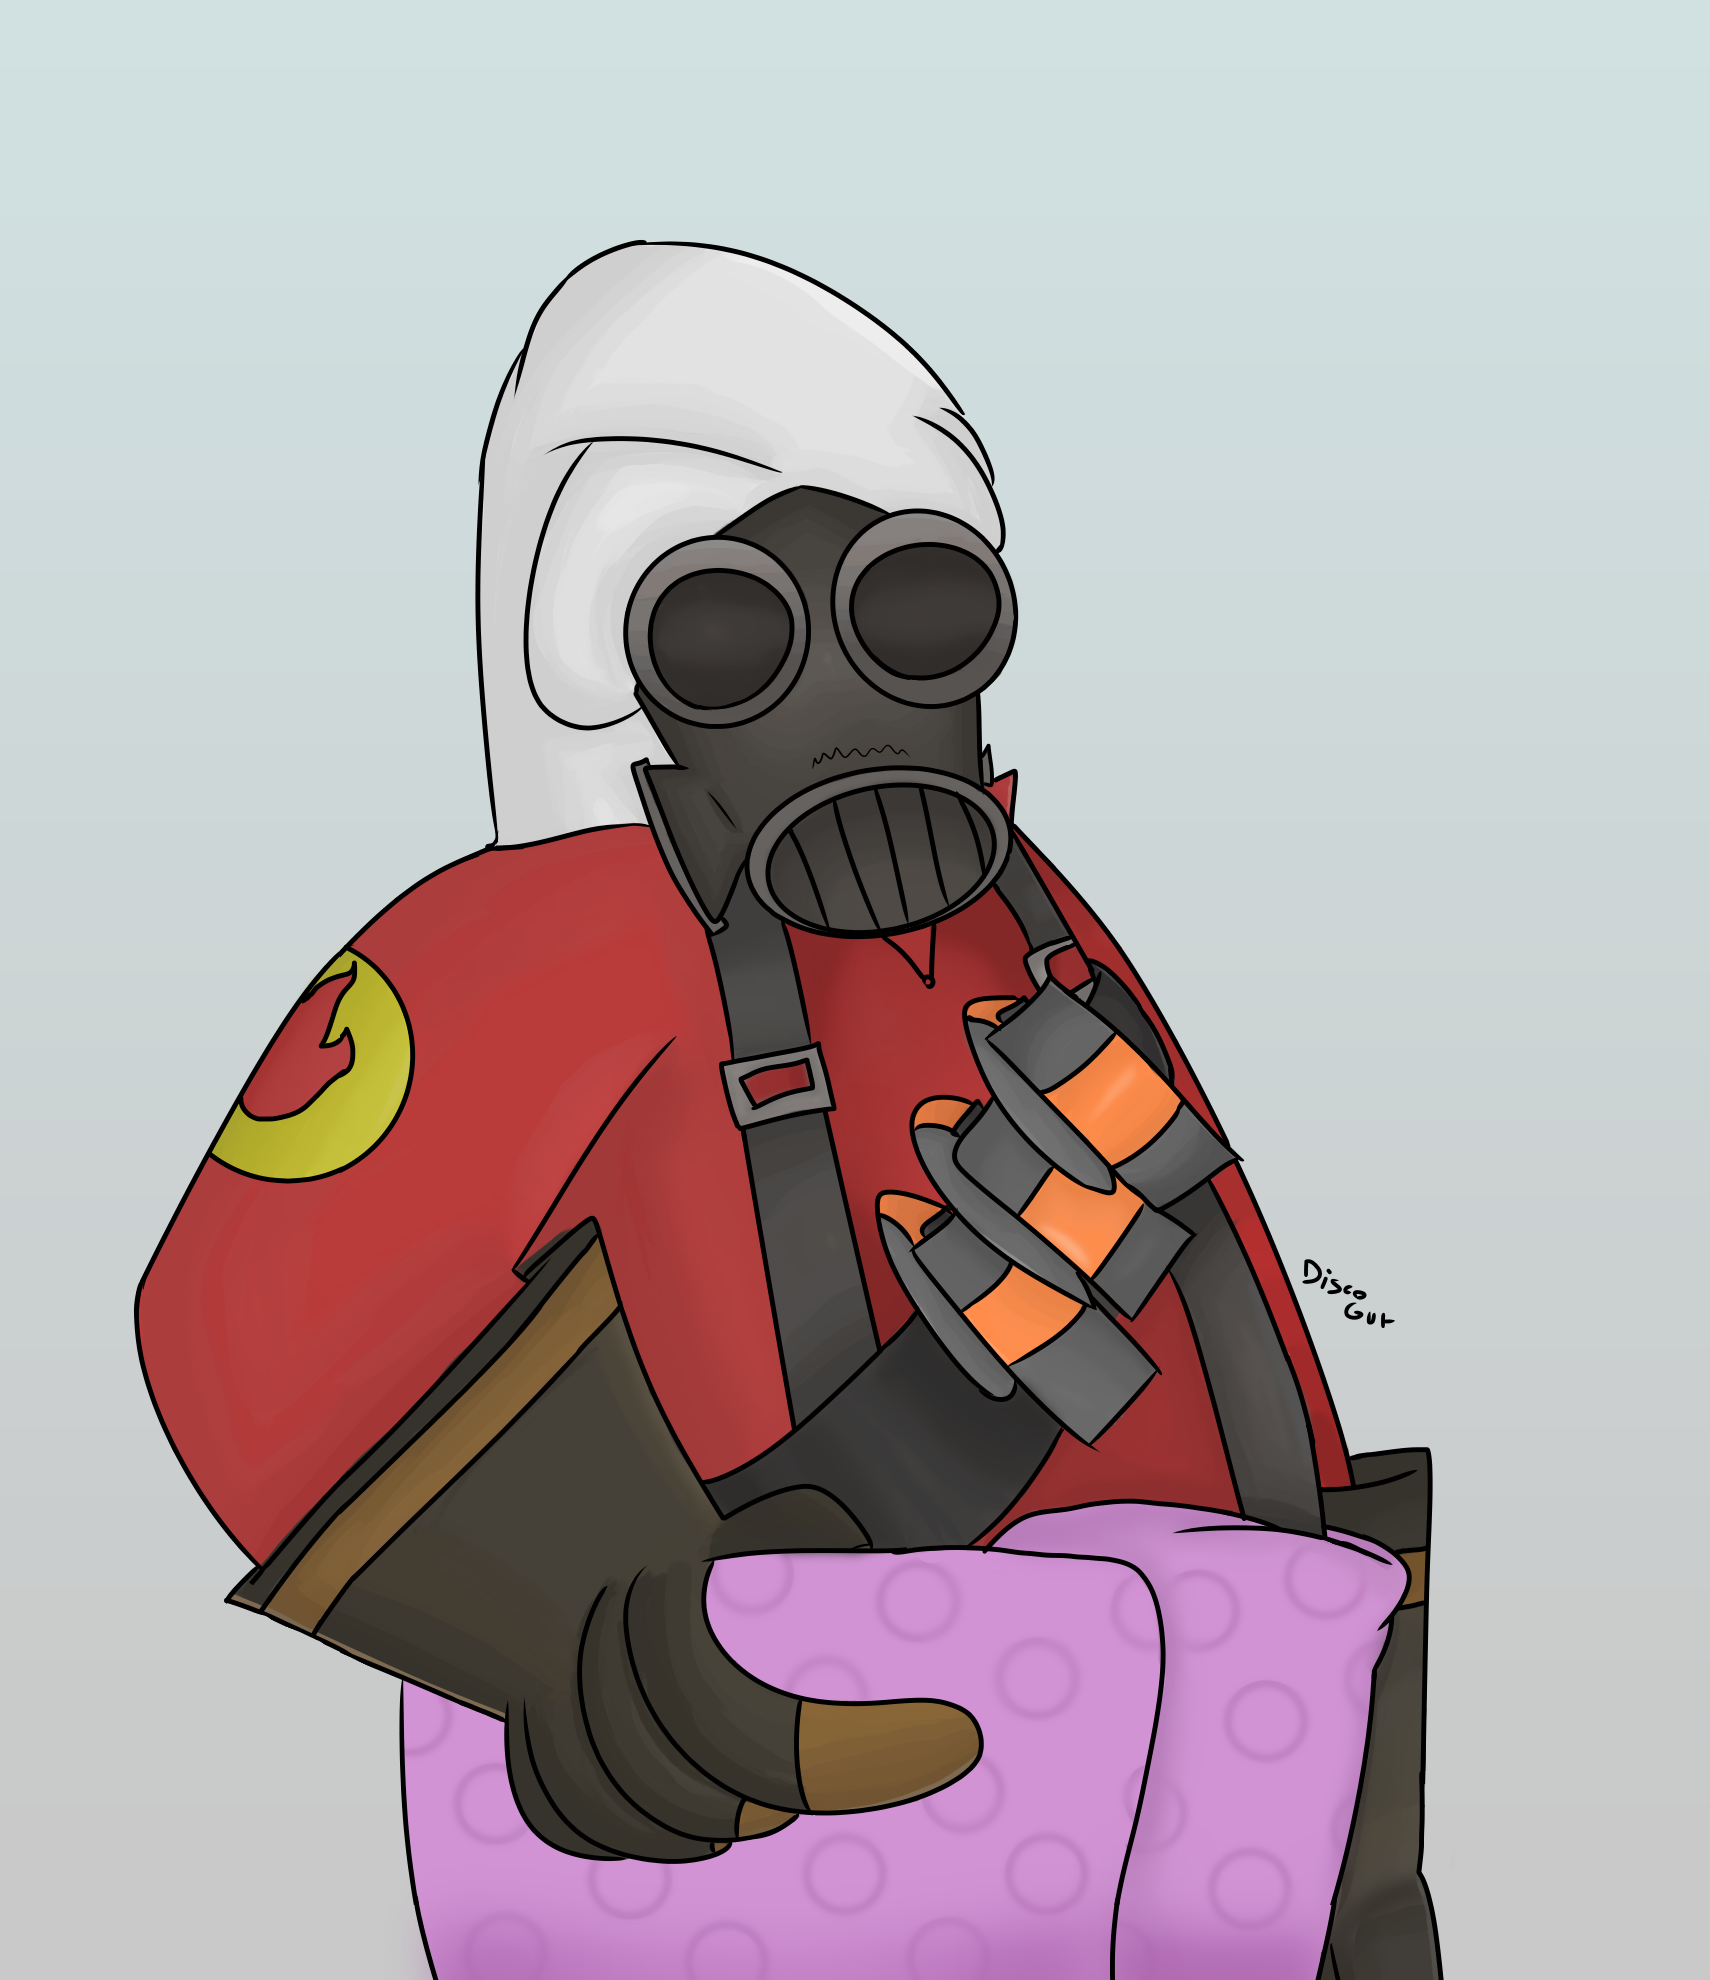 the pampered pyro